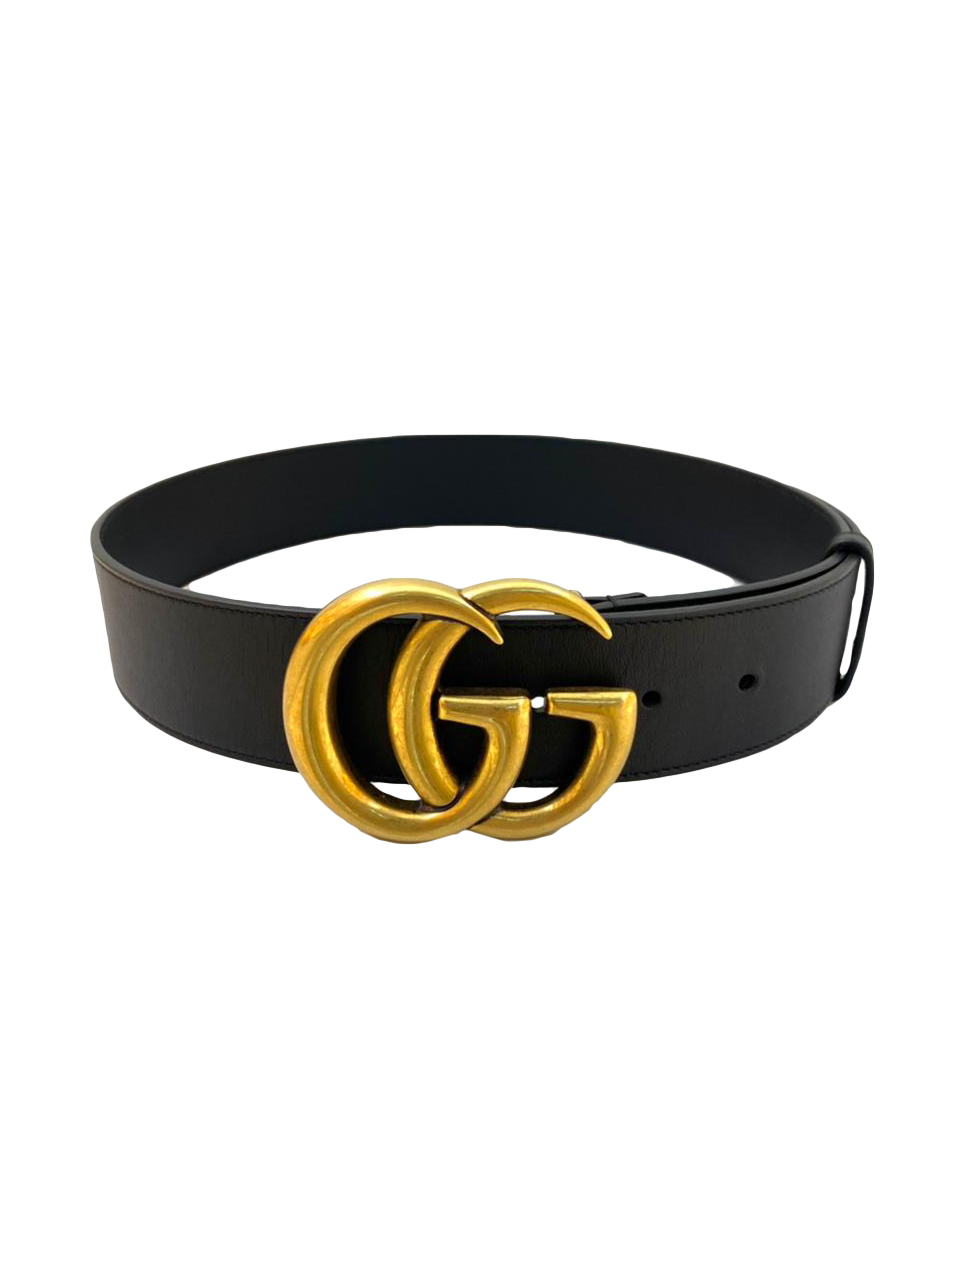 DOUBLE G WIDE BLACK LEATHER BELT - styleforless